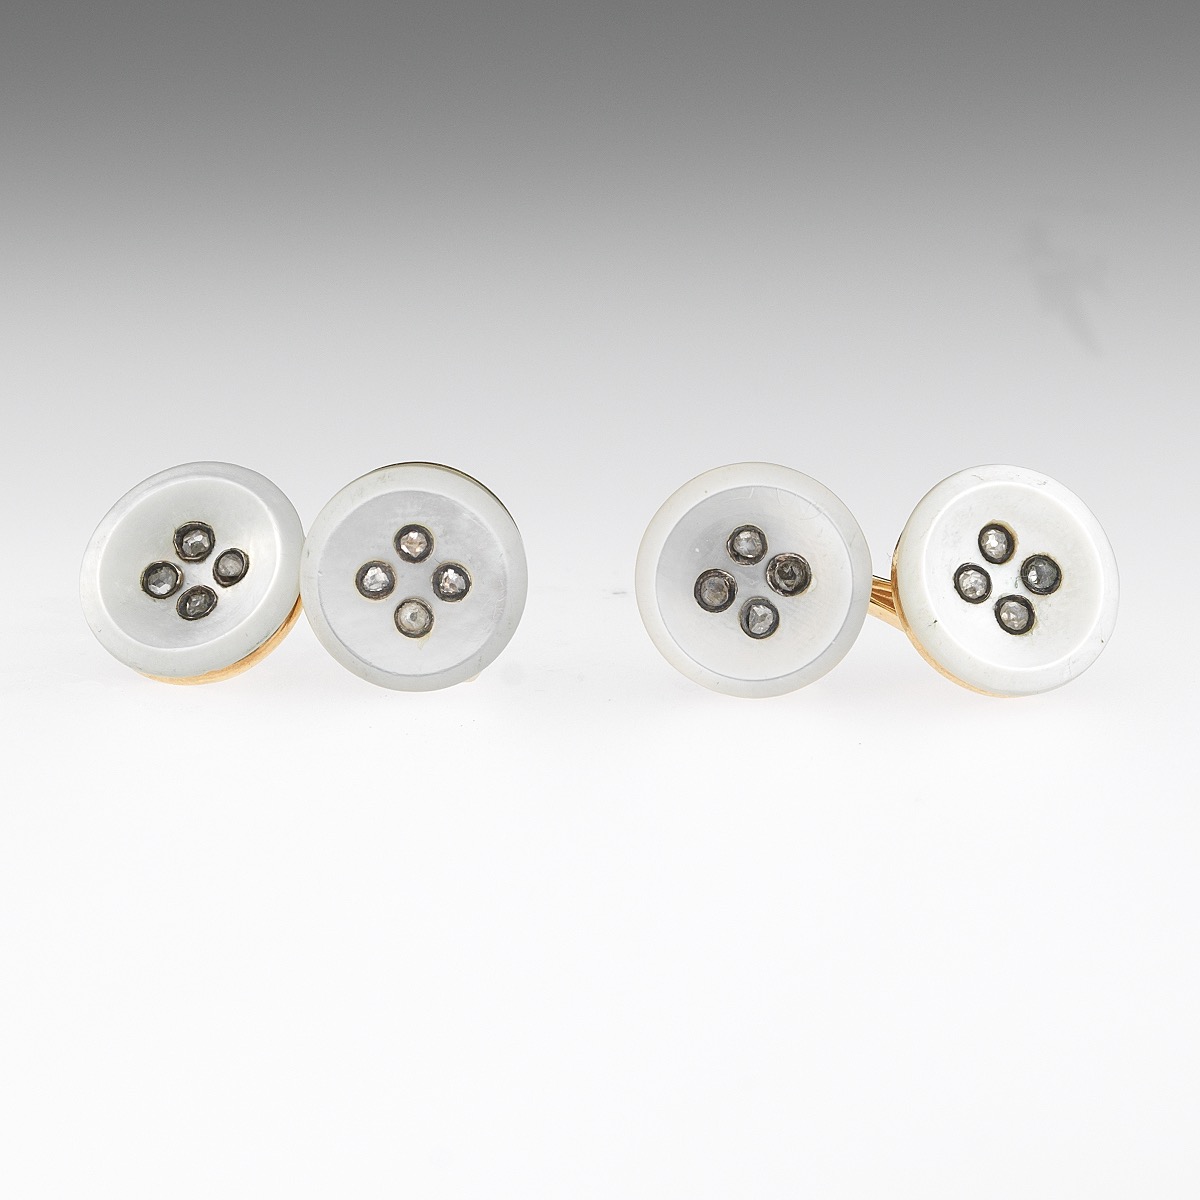 Pair of Gold, Diamond and Mother-of-Pearl Button Style Cufflinks